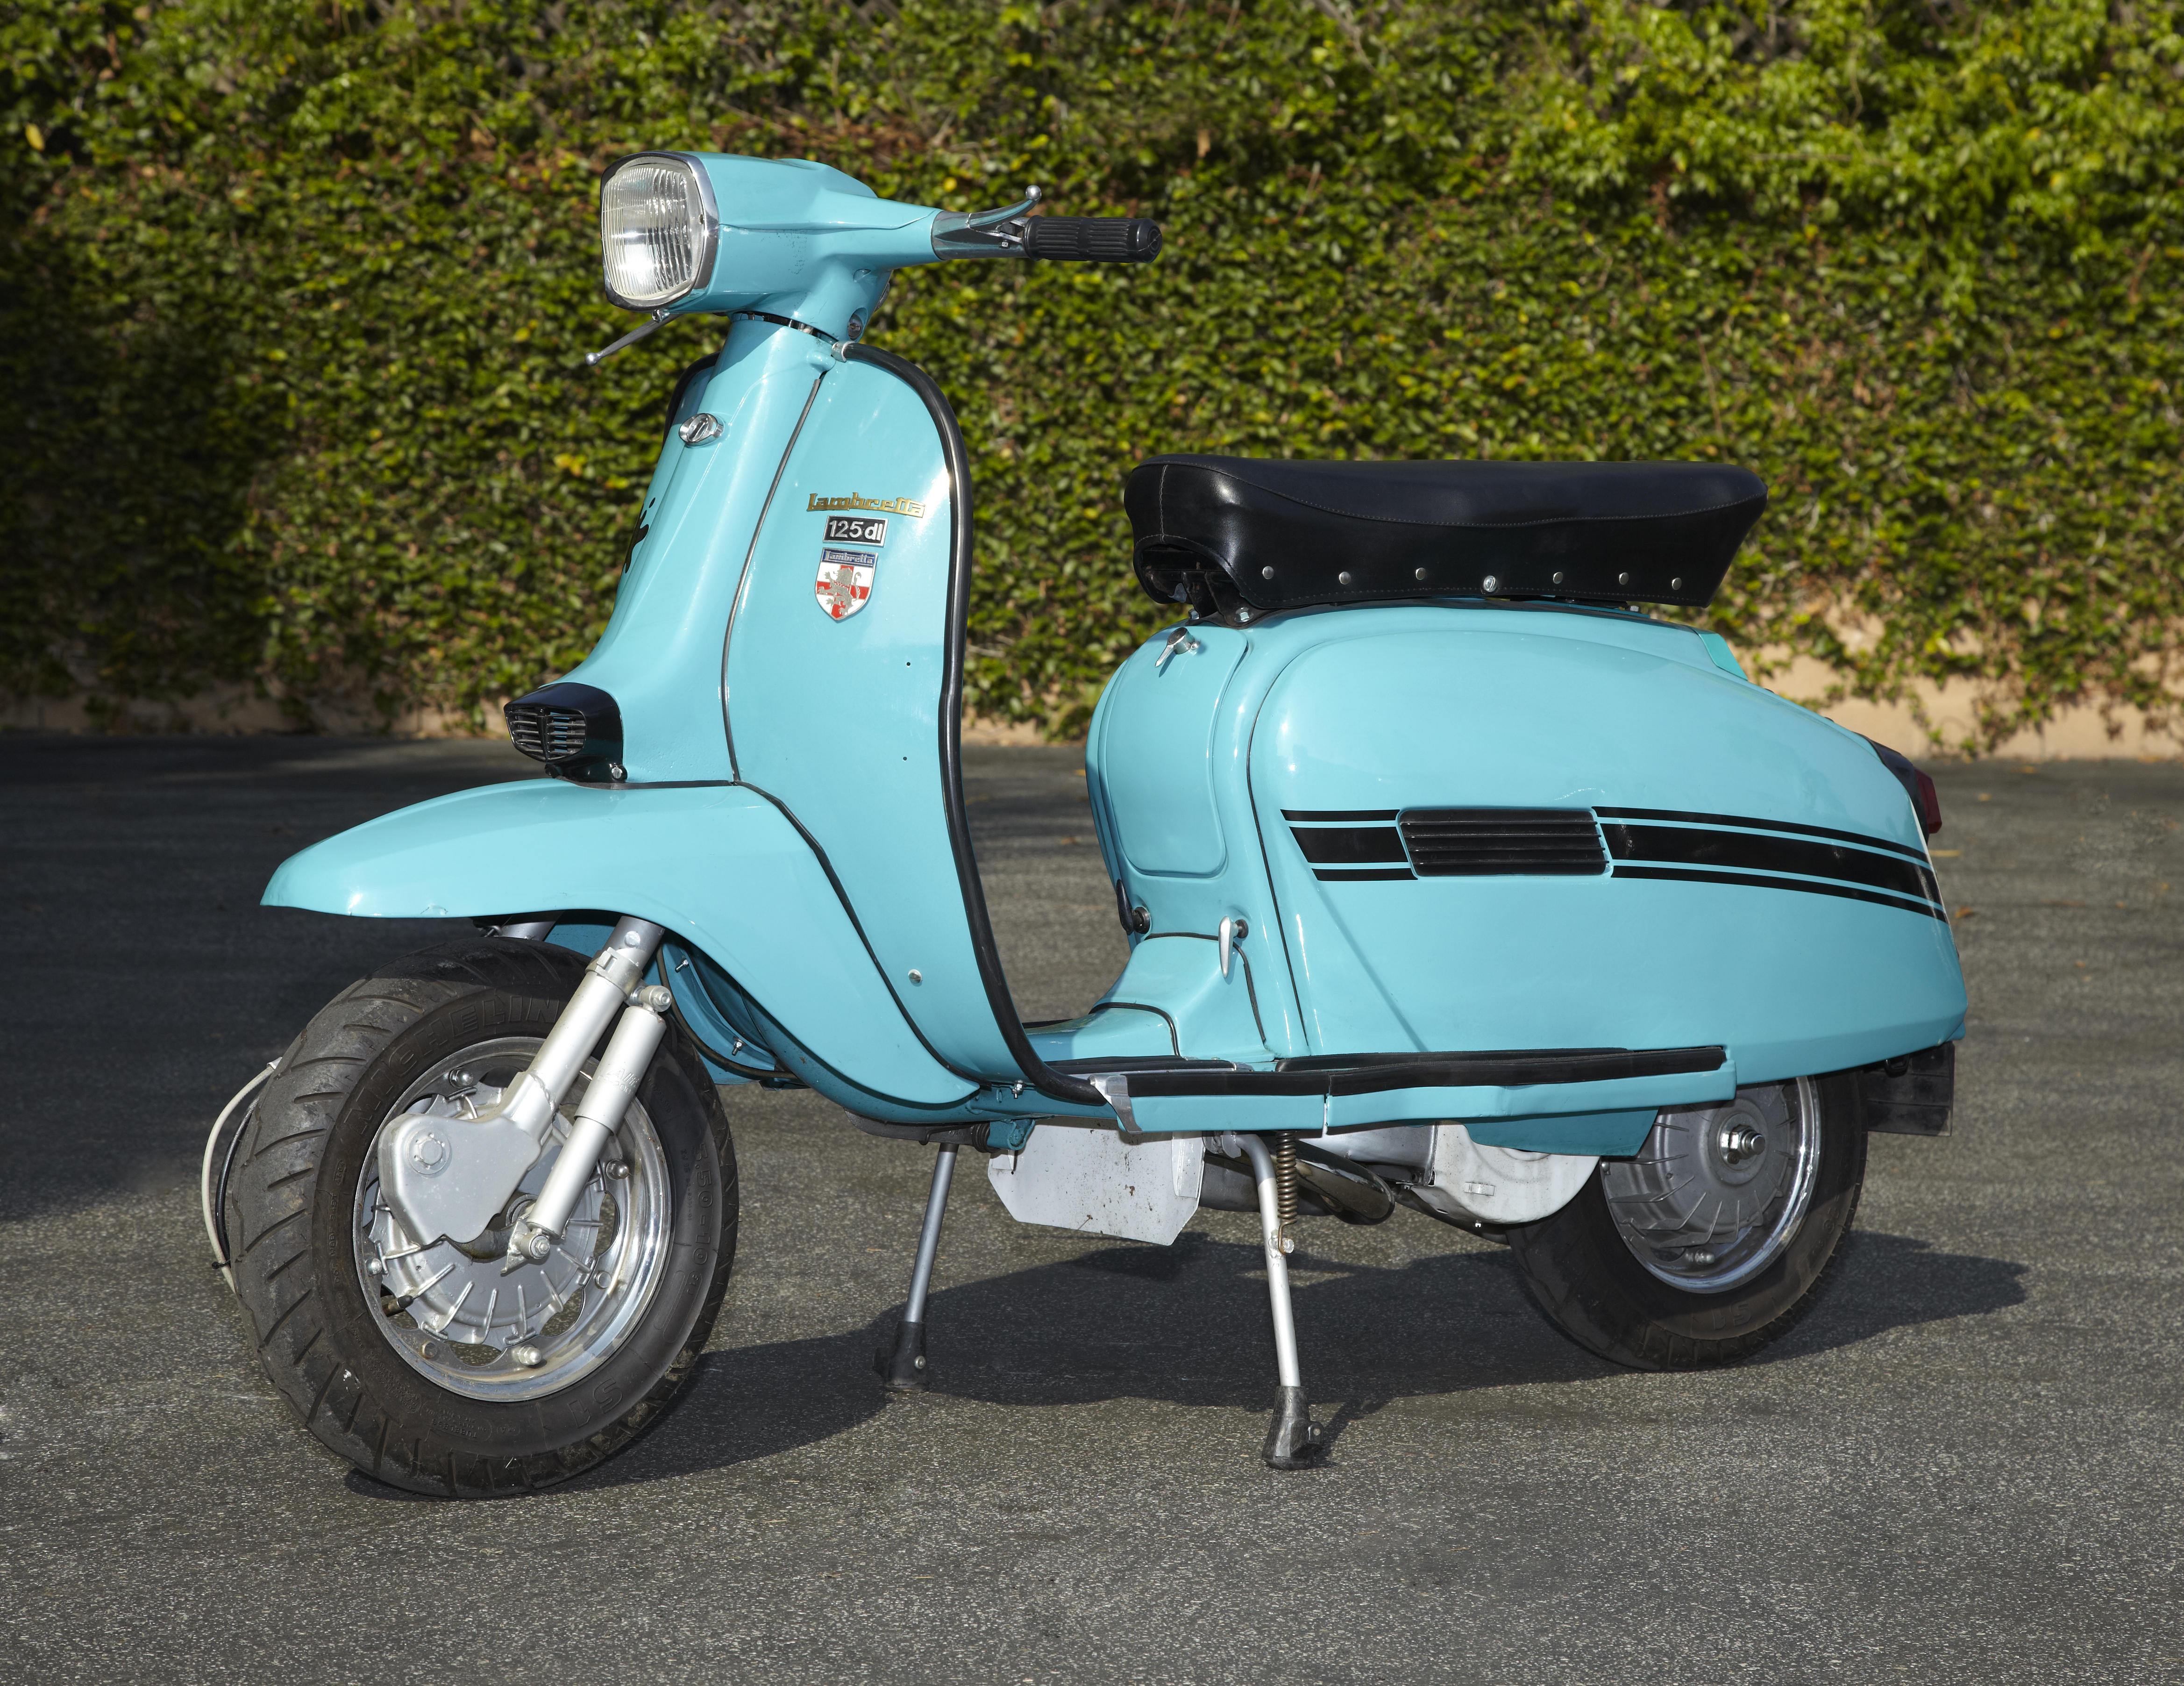 Nice Images Collection: Lambretta Scooter Desktop Wallpapers